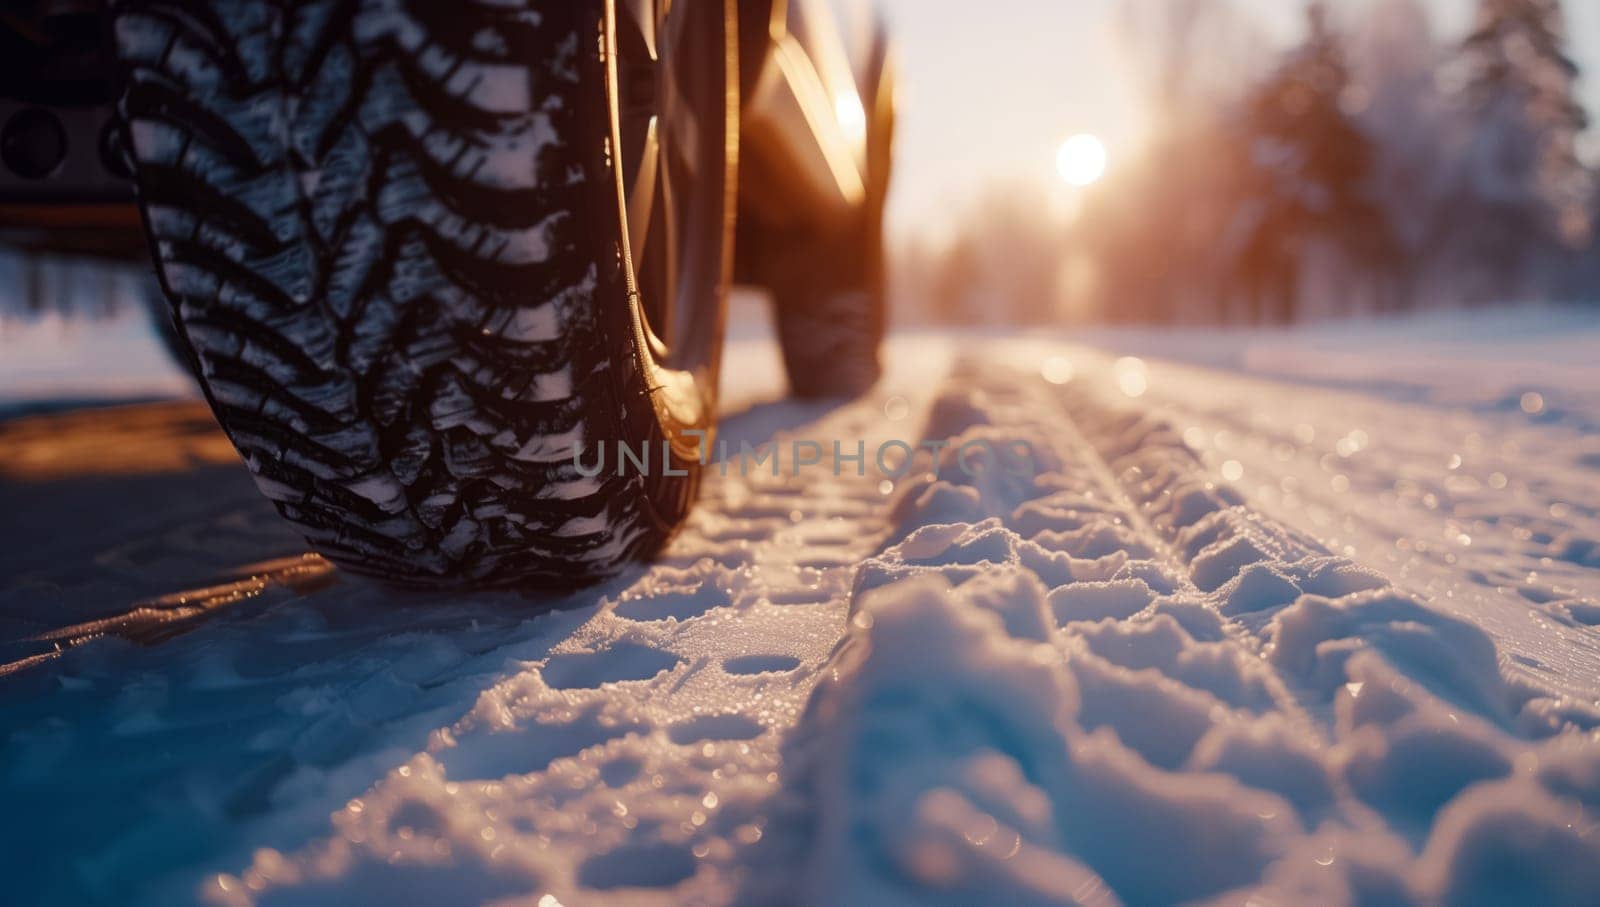 An automotive tire glides down the freezing asphalt road, surrounded by a natural landscape painted in tints and shades of wood and electric blue, as the sun sets